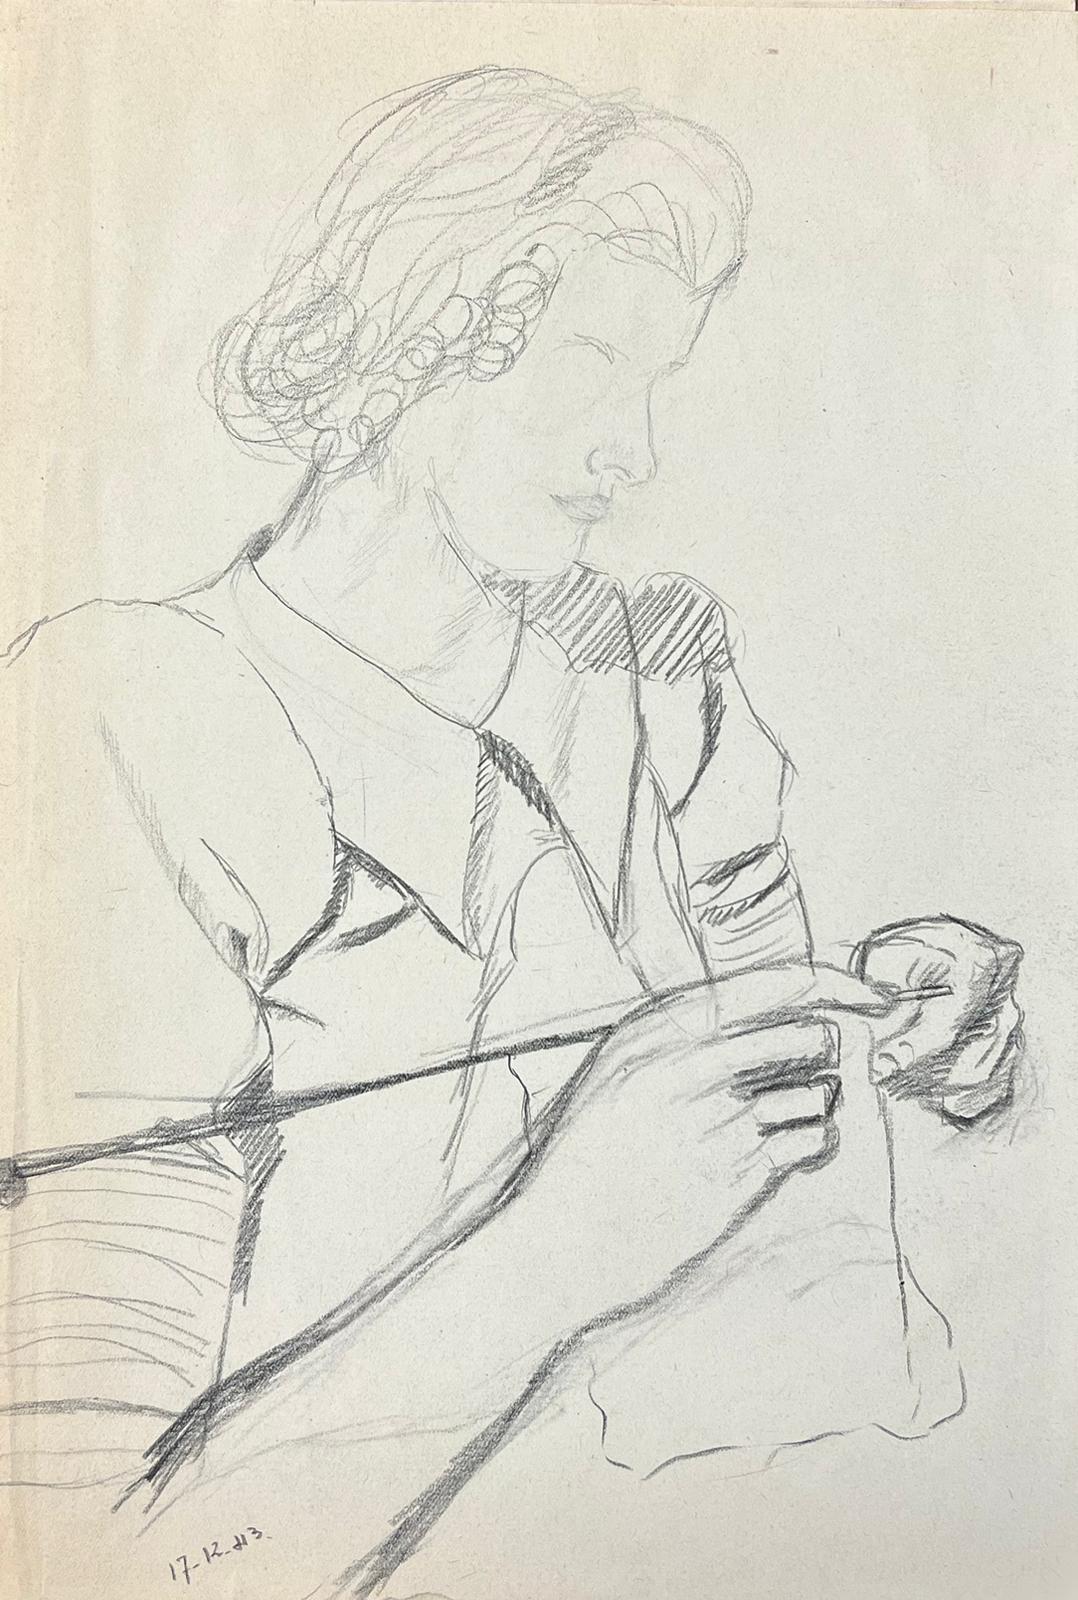 Lady Knitting
by Geneviève Zondervan (French 1922-2013)
pencil drawing on paper

paper: 12.5 x 9 inches

Superb mid-century oil painting on board by the French artist, Geneviève Zondervan (French 1922-2013). The painting has excellent provenance,